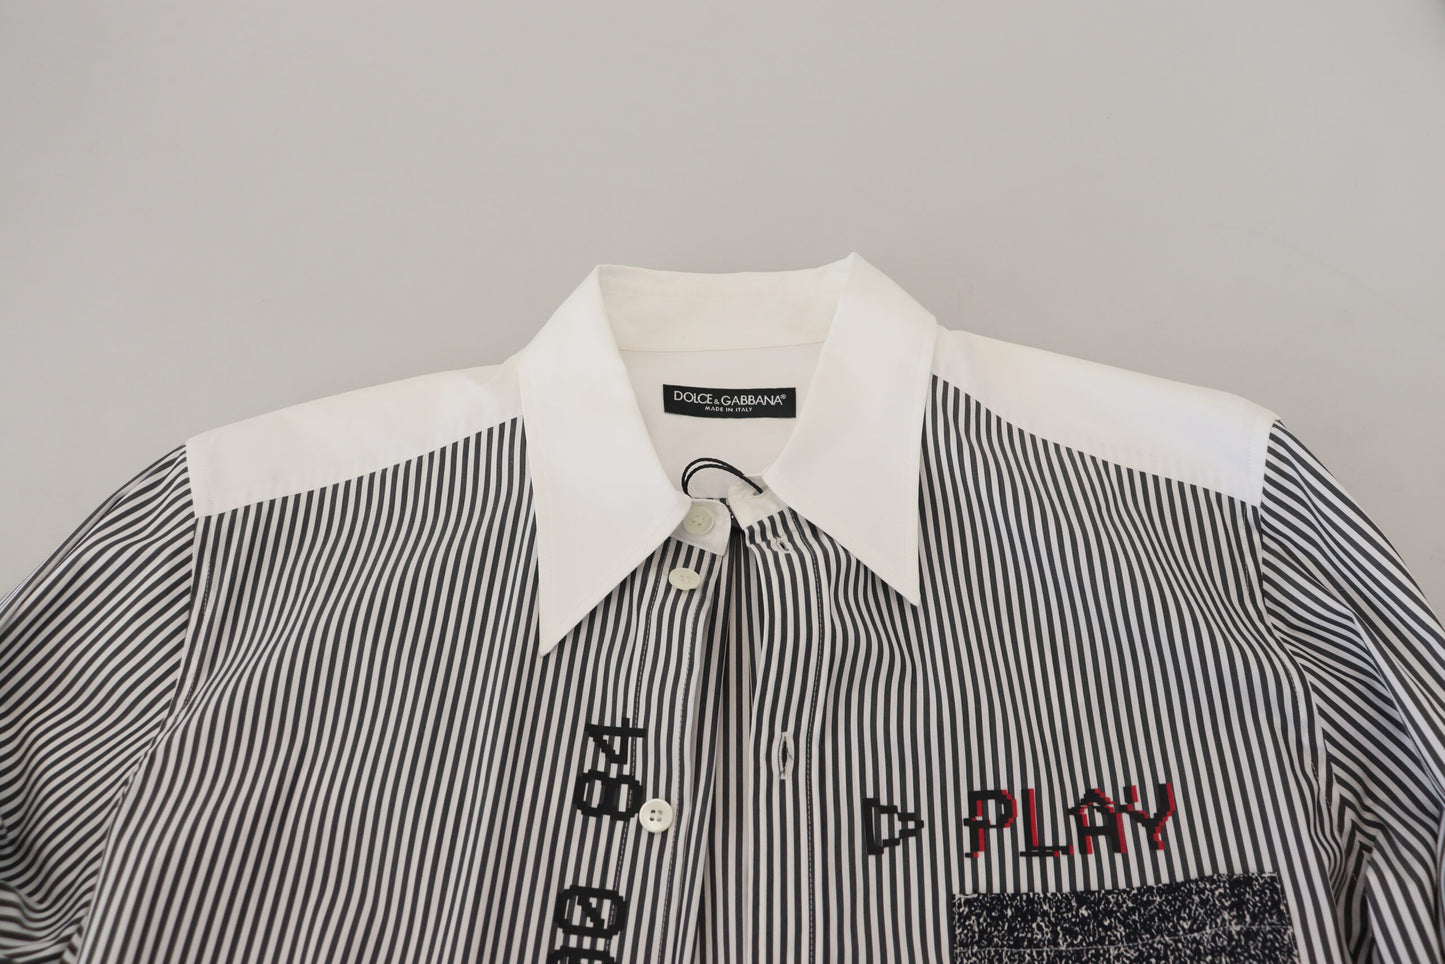 Classic Black and White Striped Button-Down Shirt